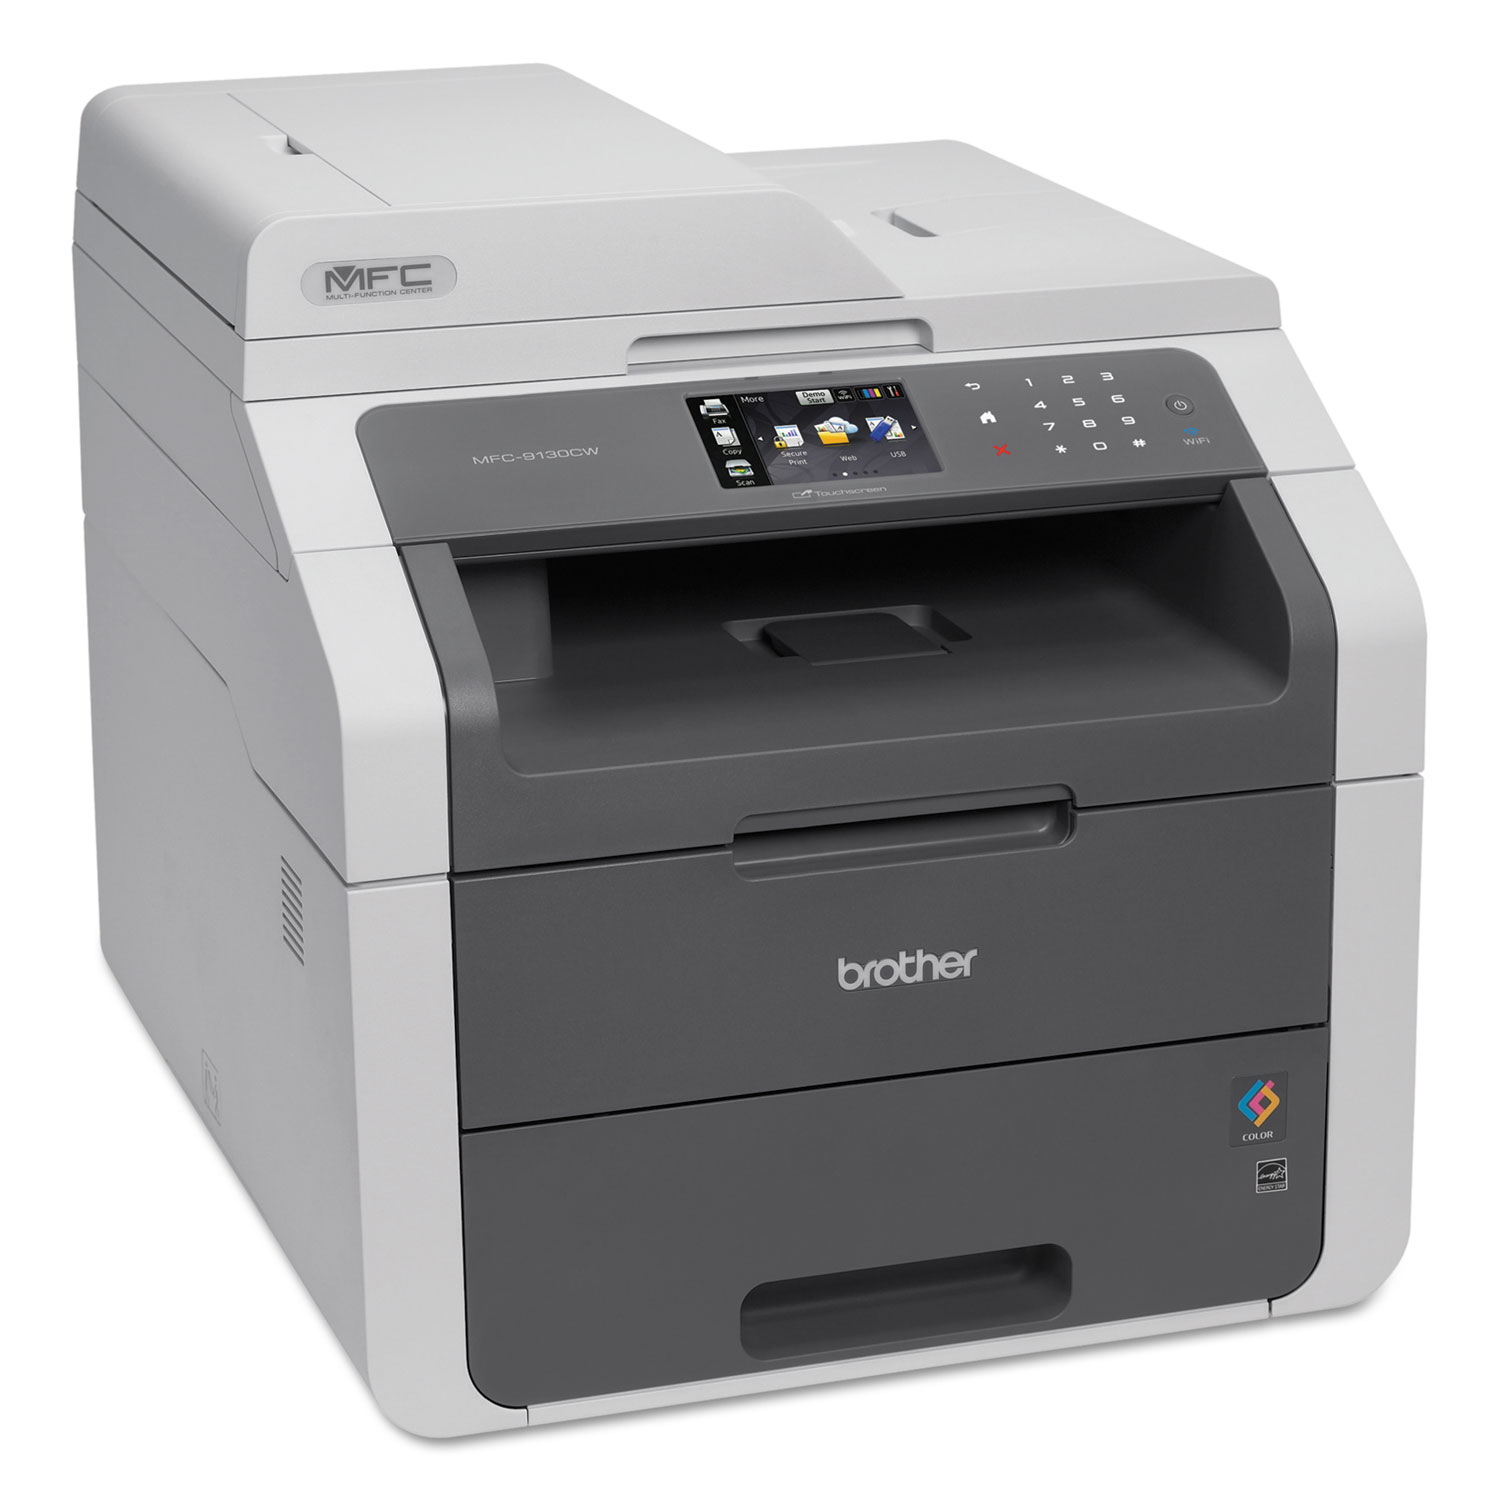 MFC-9130CW Wireless All-in-One Laser Printer, Copy/Fax/Print/Scan